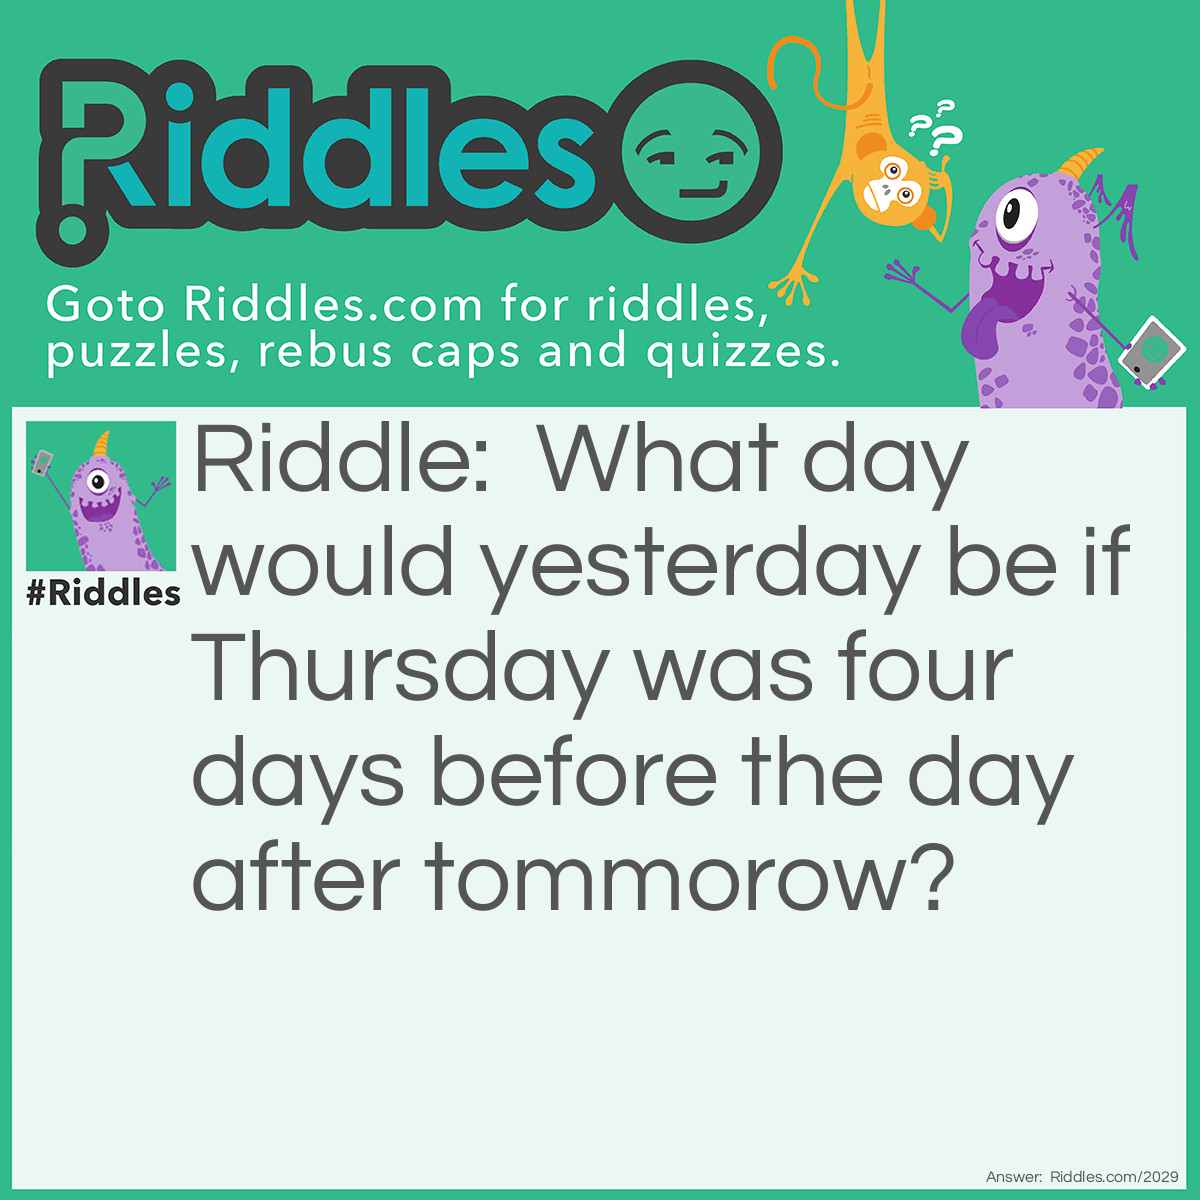 Riddle: What day would yesterday be if Thursday was four days before the day after tommorow? Answer: Friday.